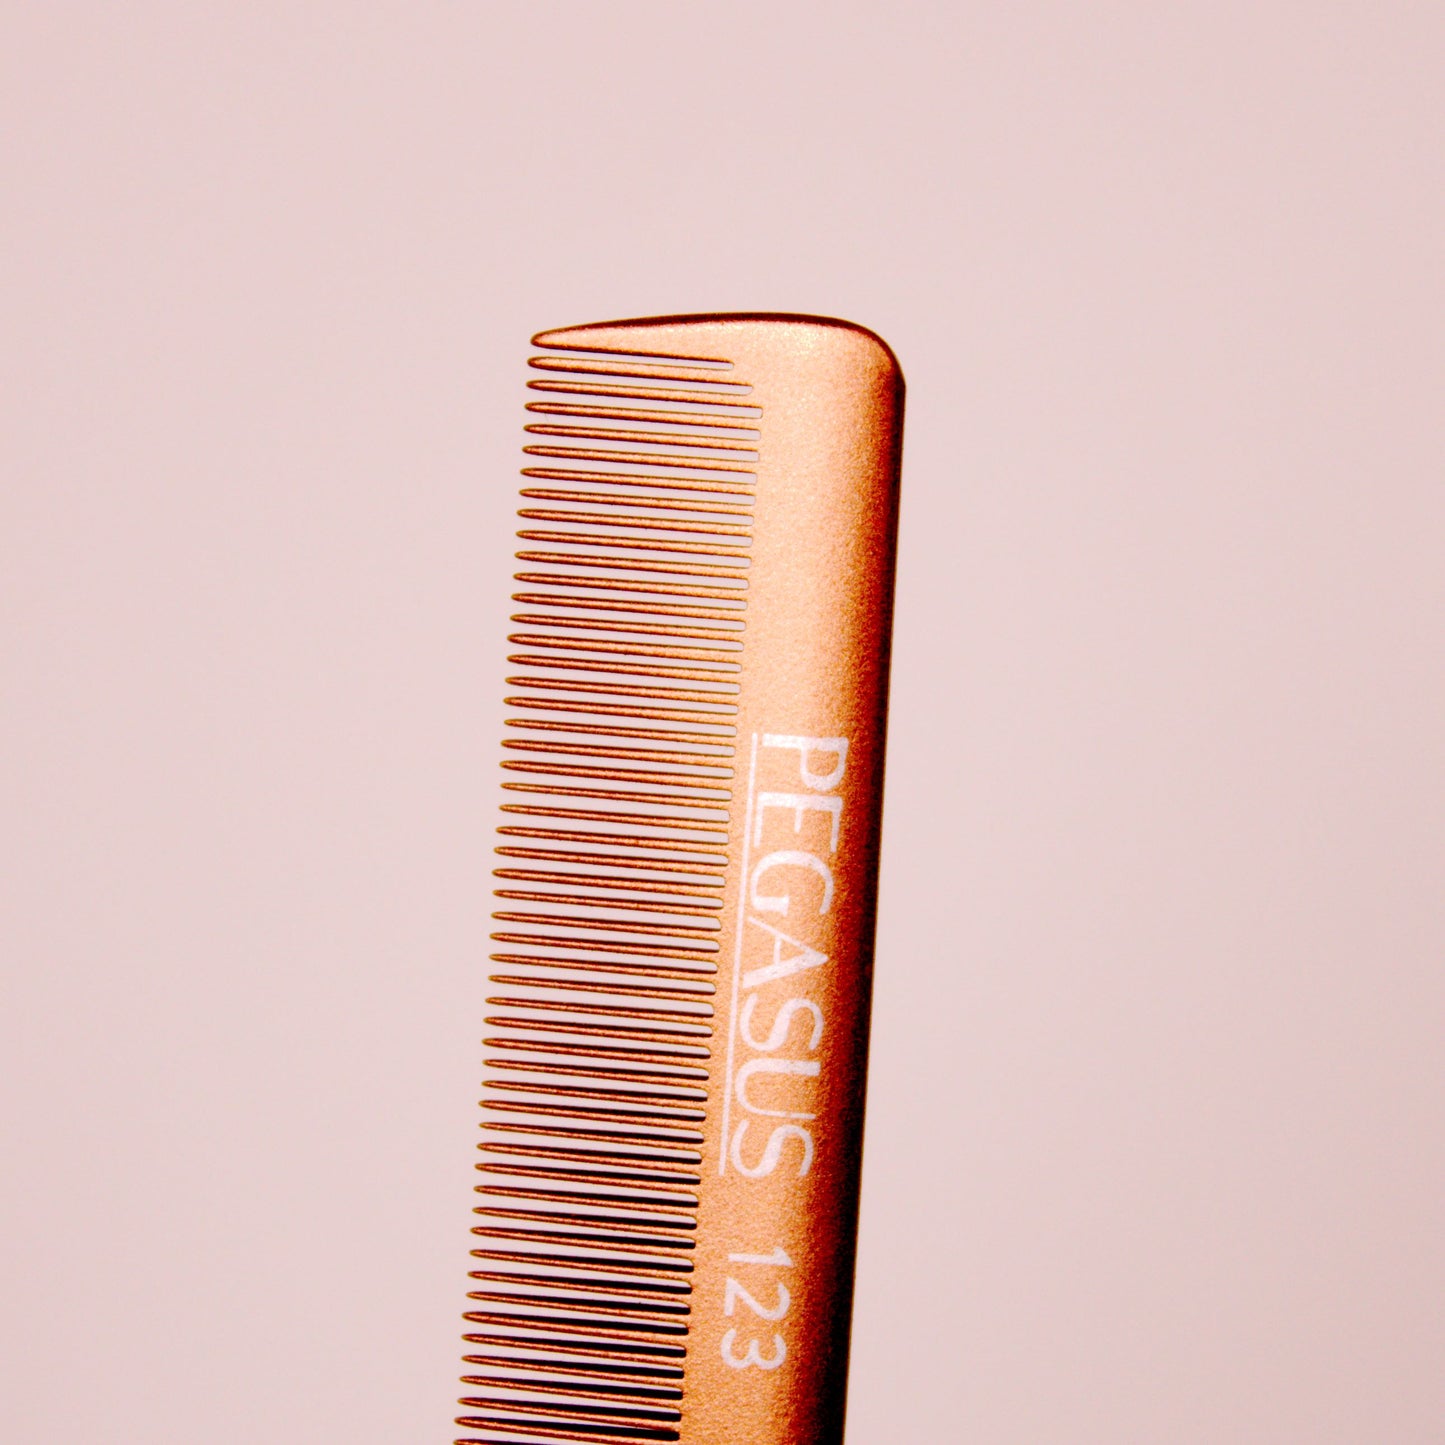 Pegasus MICOLOR 123, 9.75in Hard Rubber Fine Tooth Pintail Comb, Seamless, Anti Static, Heat and Chemically Resistant, Stainless Steel Pin, Great for Parting, Coloring Hair | Peines de goma dura - Gold